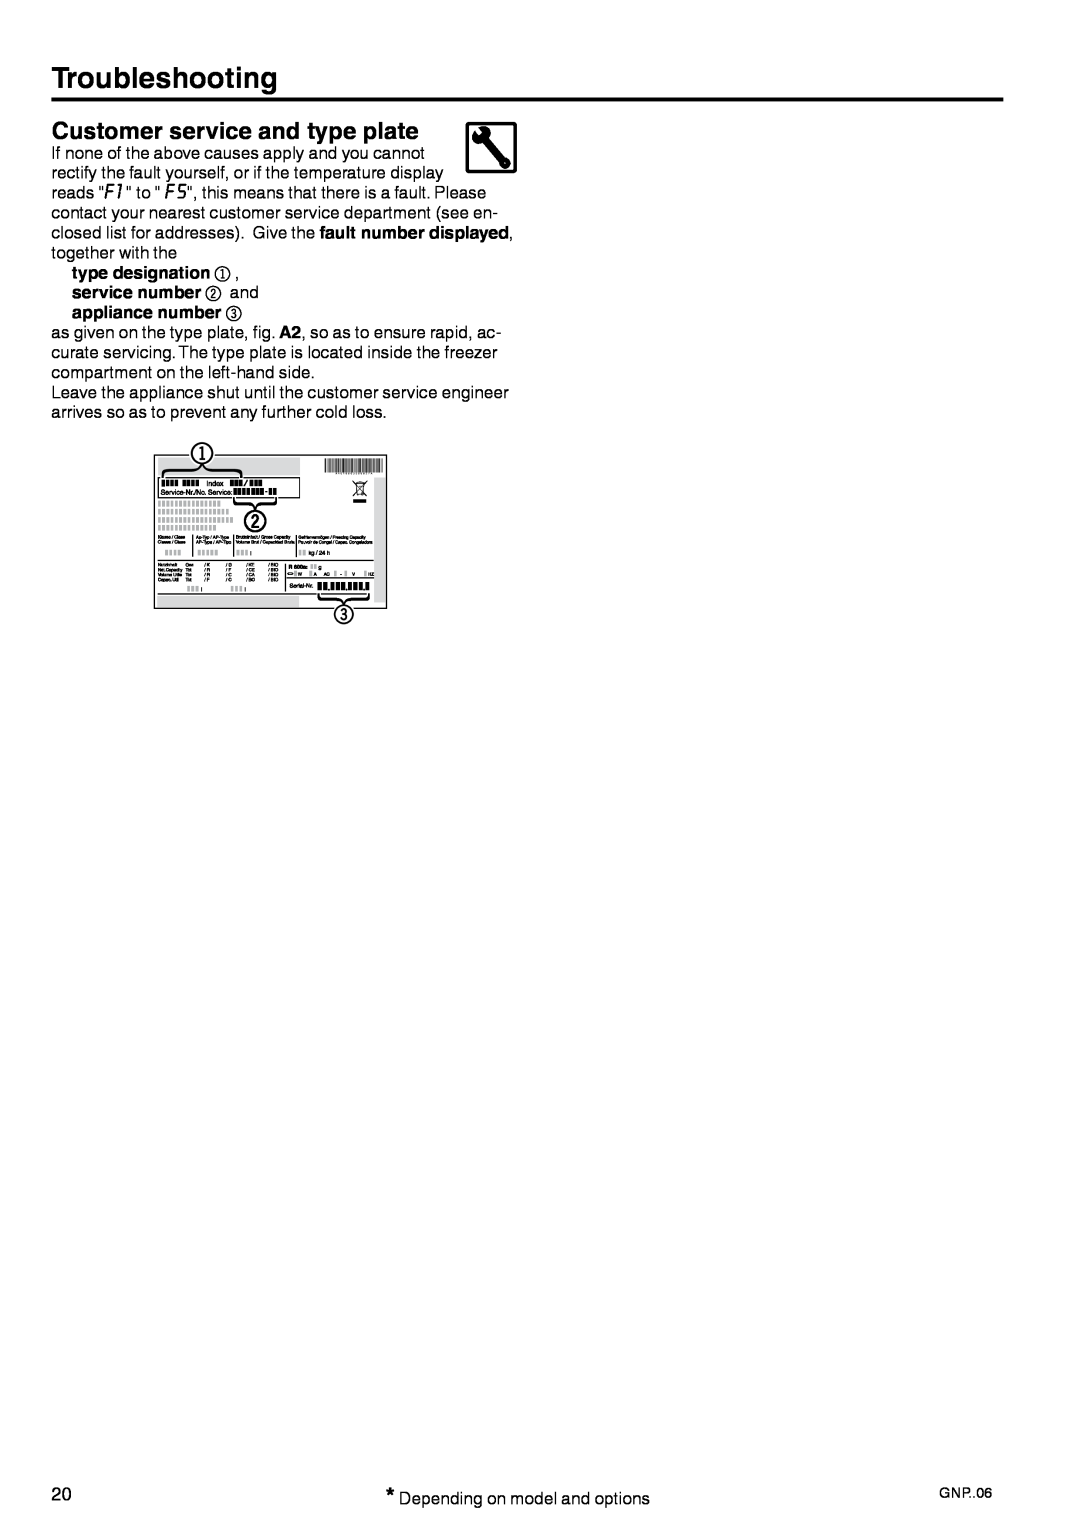 Liebherr 7084 152 - 00 manual Customer service and type plate, type designation 1, service number 2 and appliance number 